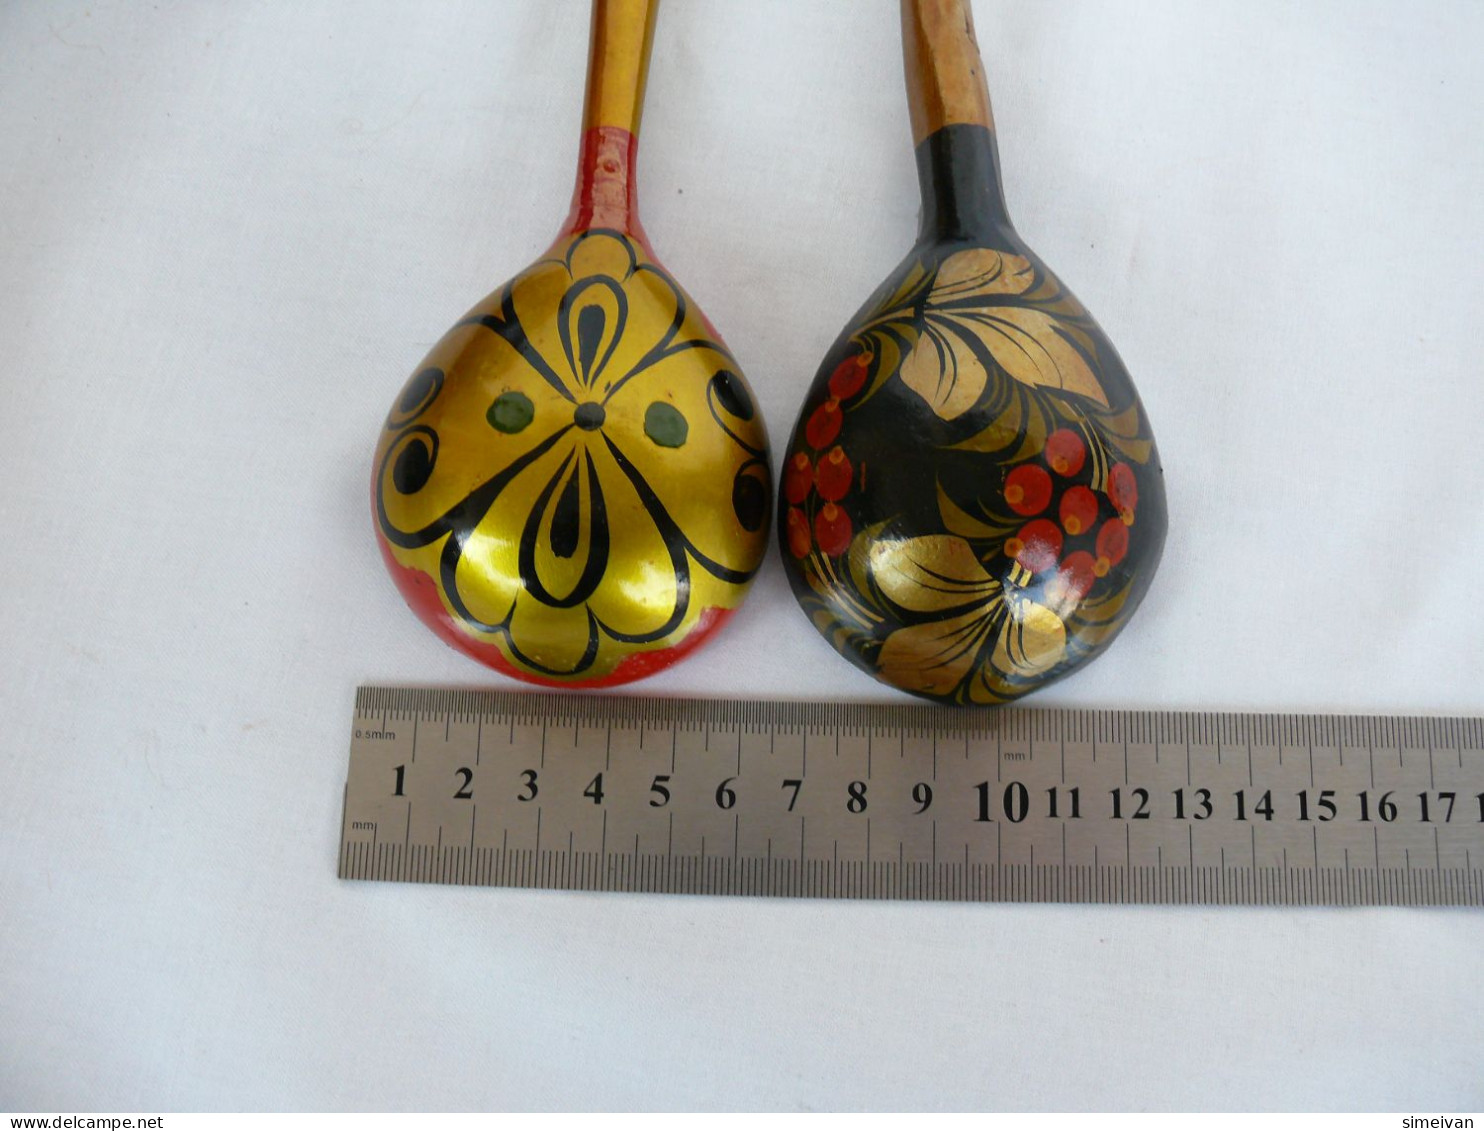 Vintage Khokhloma Wooden Spoons Hand Painted in Russia Russian Art #2191